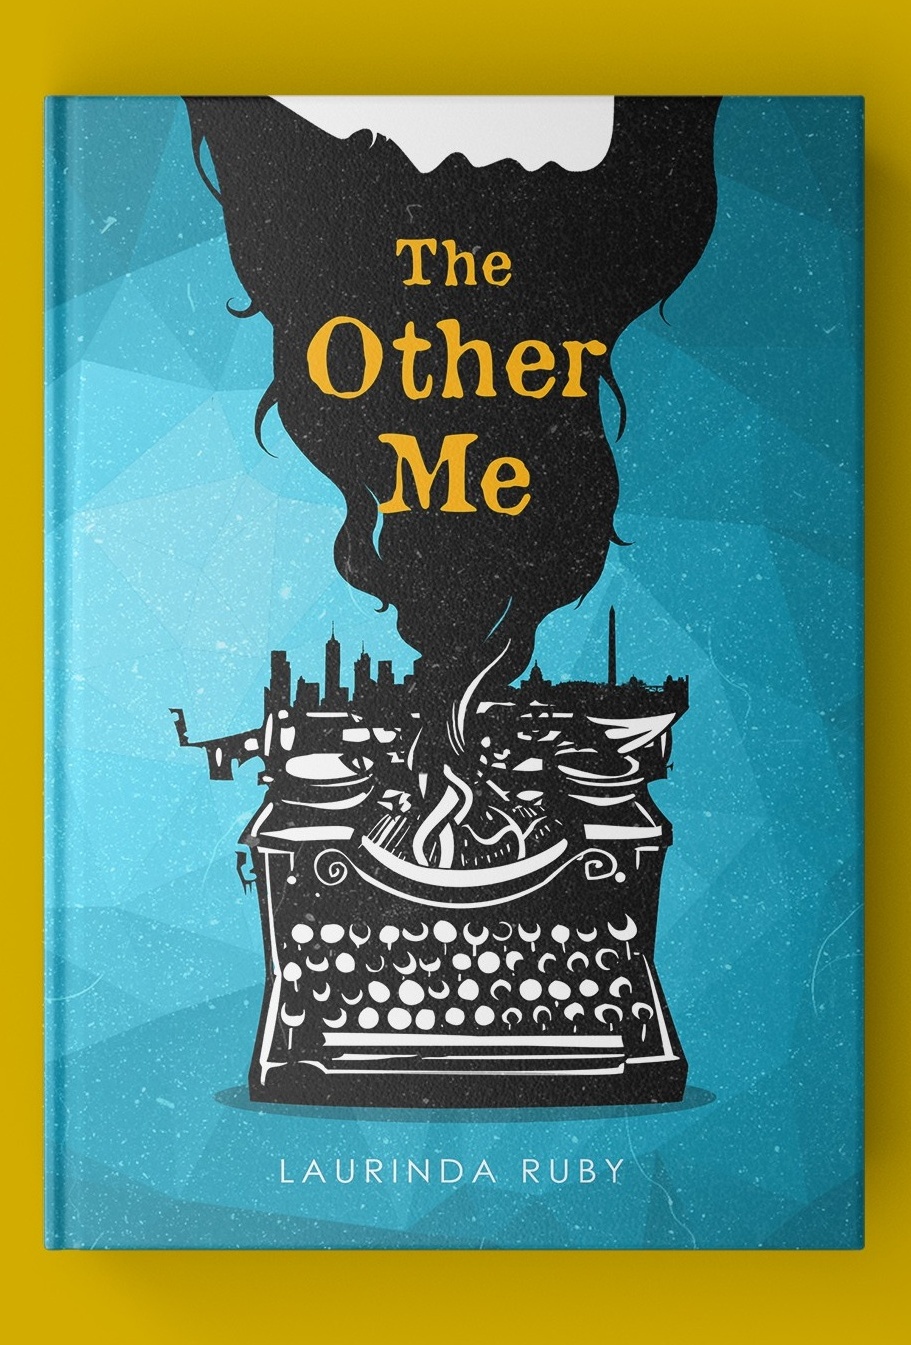 Surreal Illustrated Book Cover Design